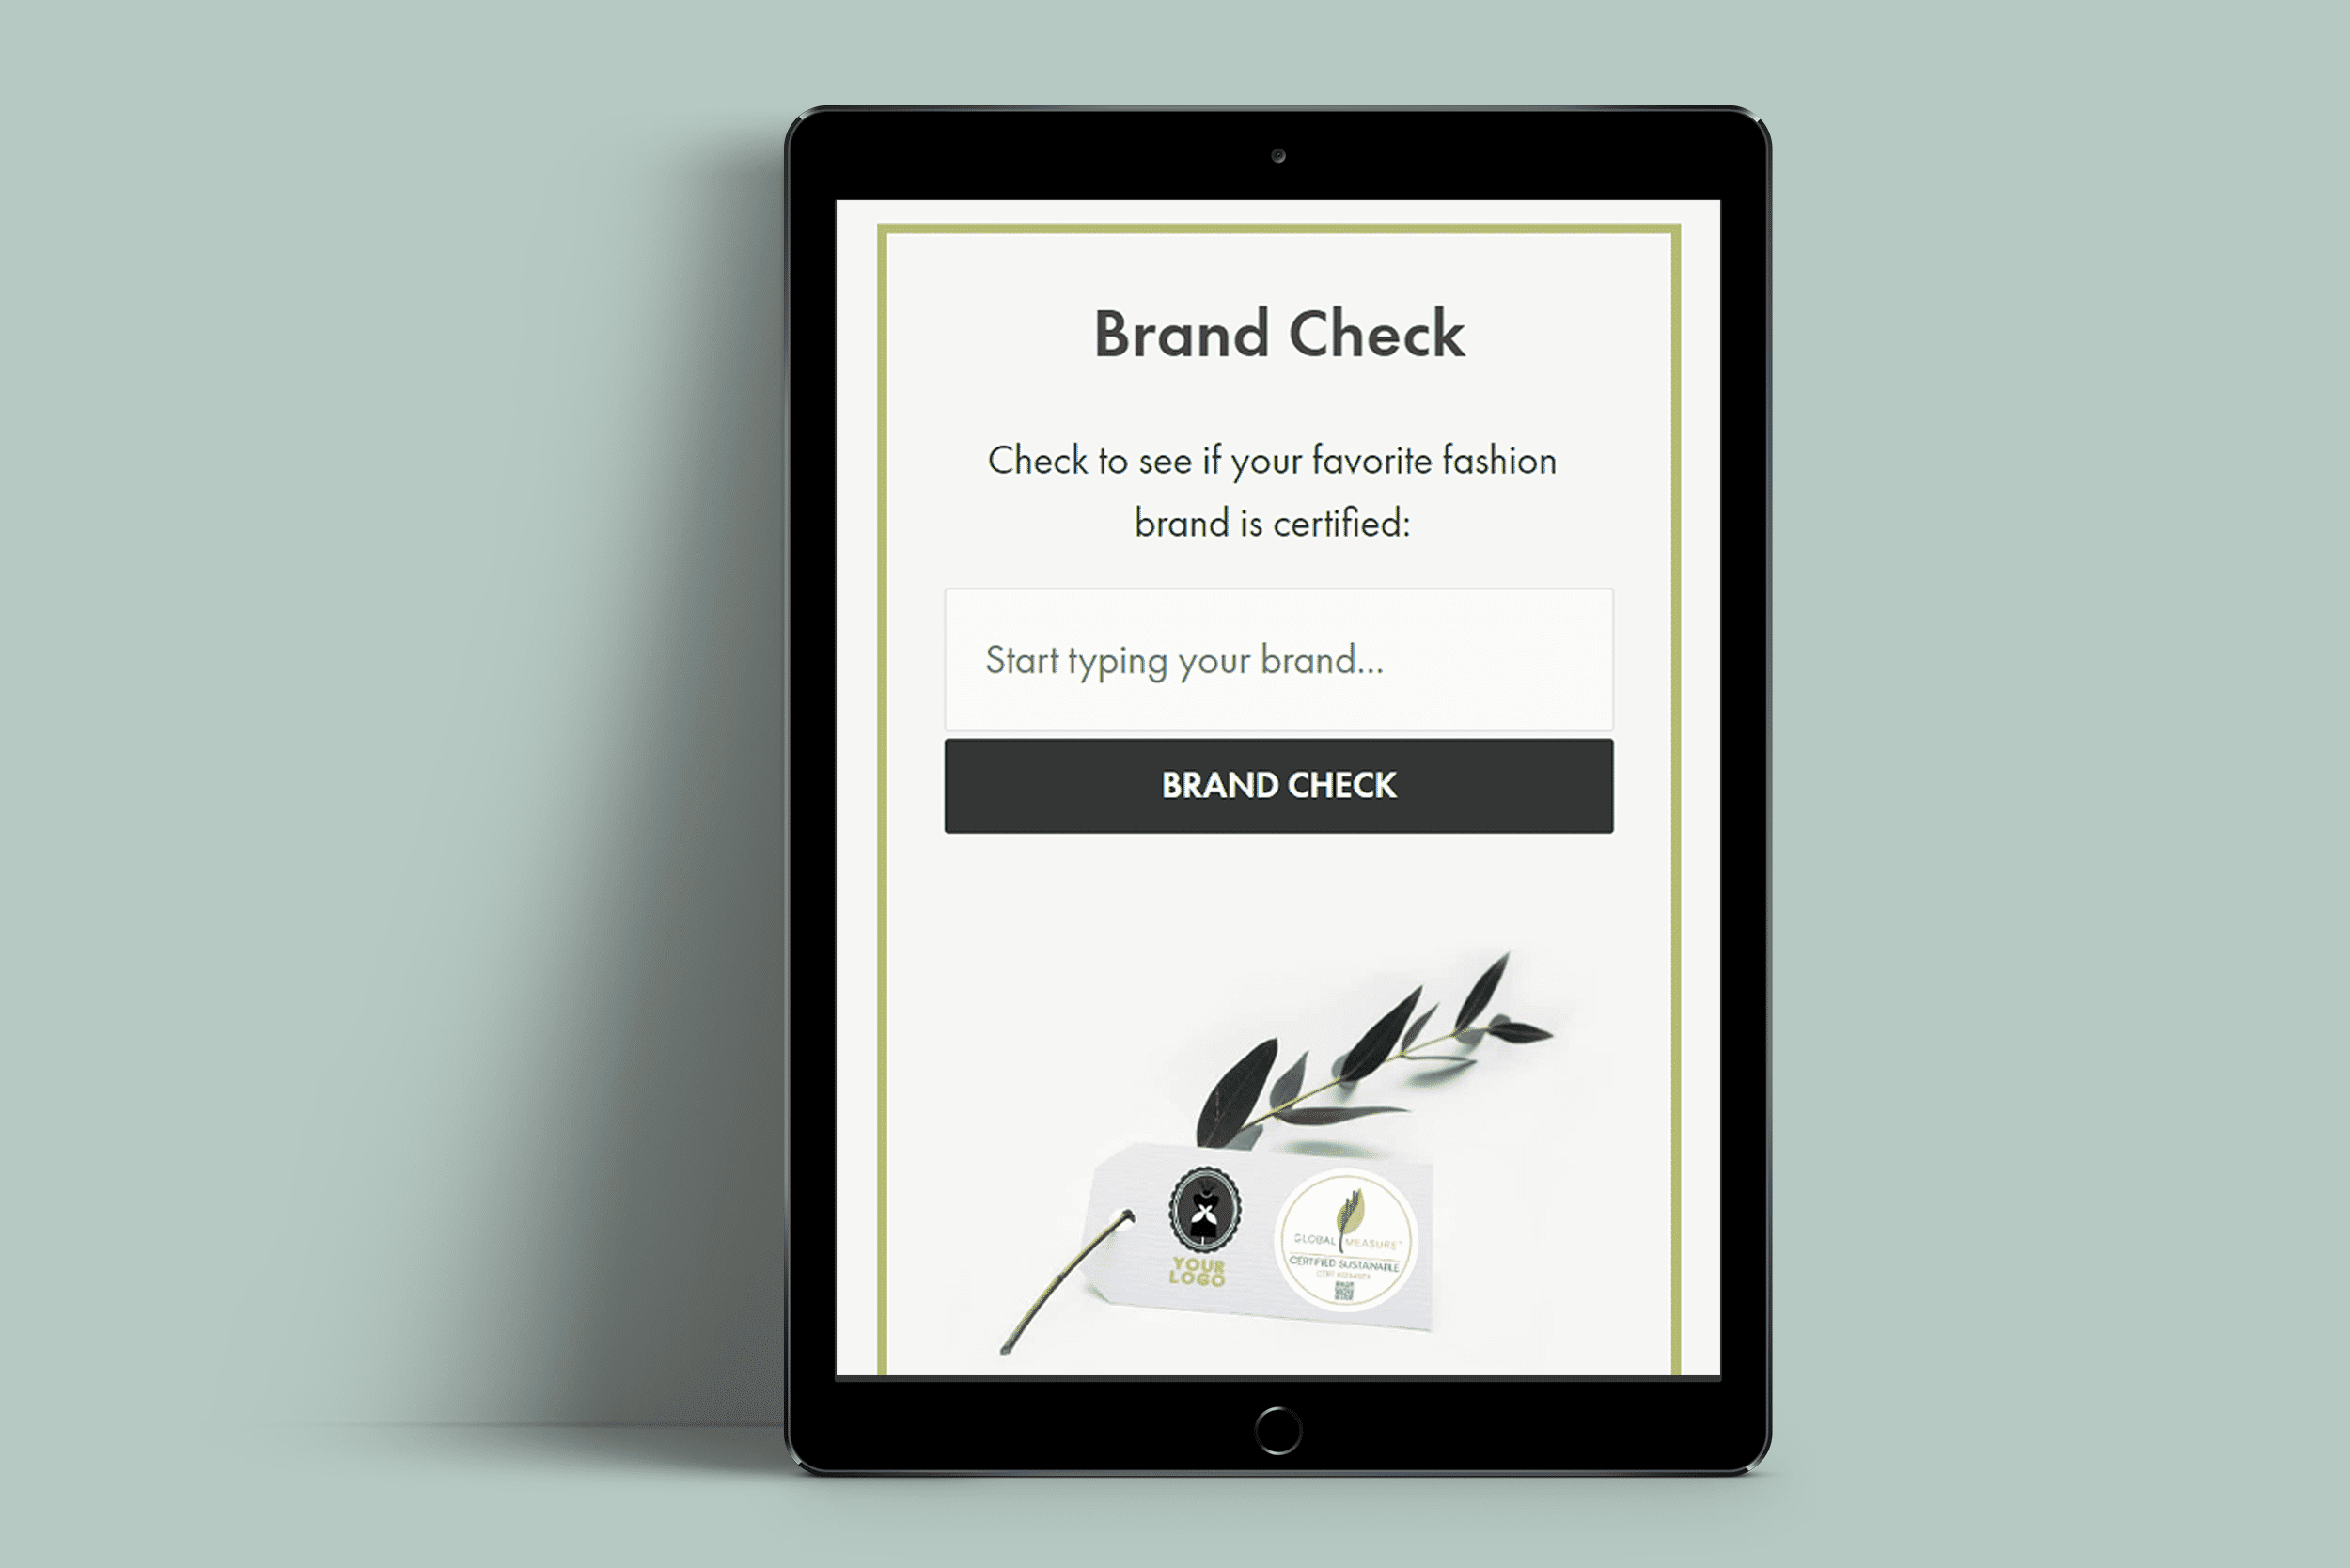 Global Measure's website Brand Check feature on a tablet